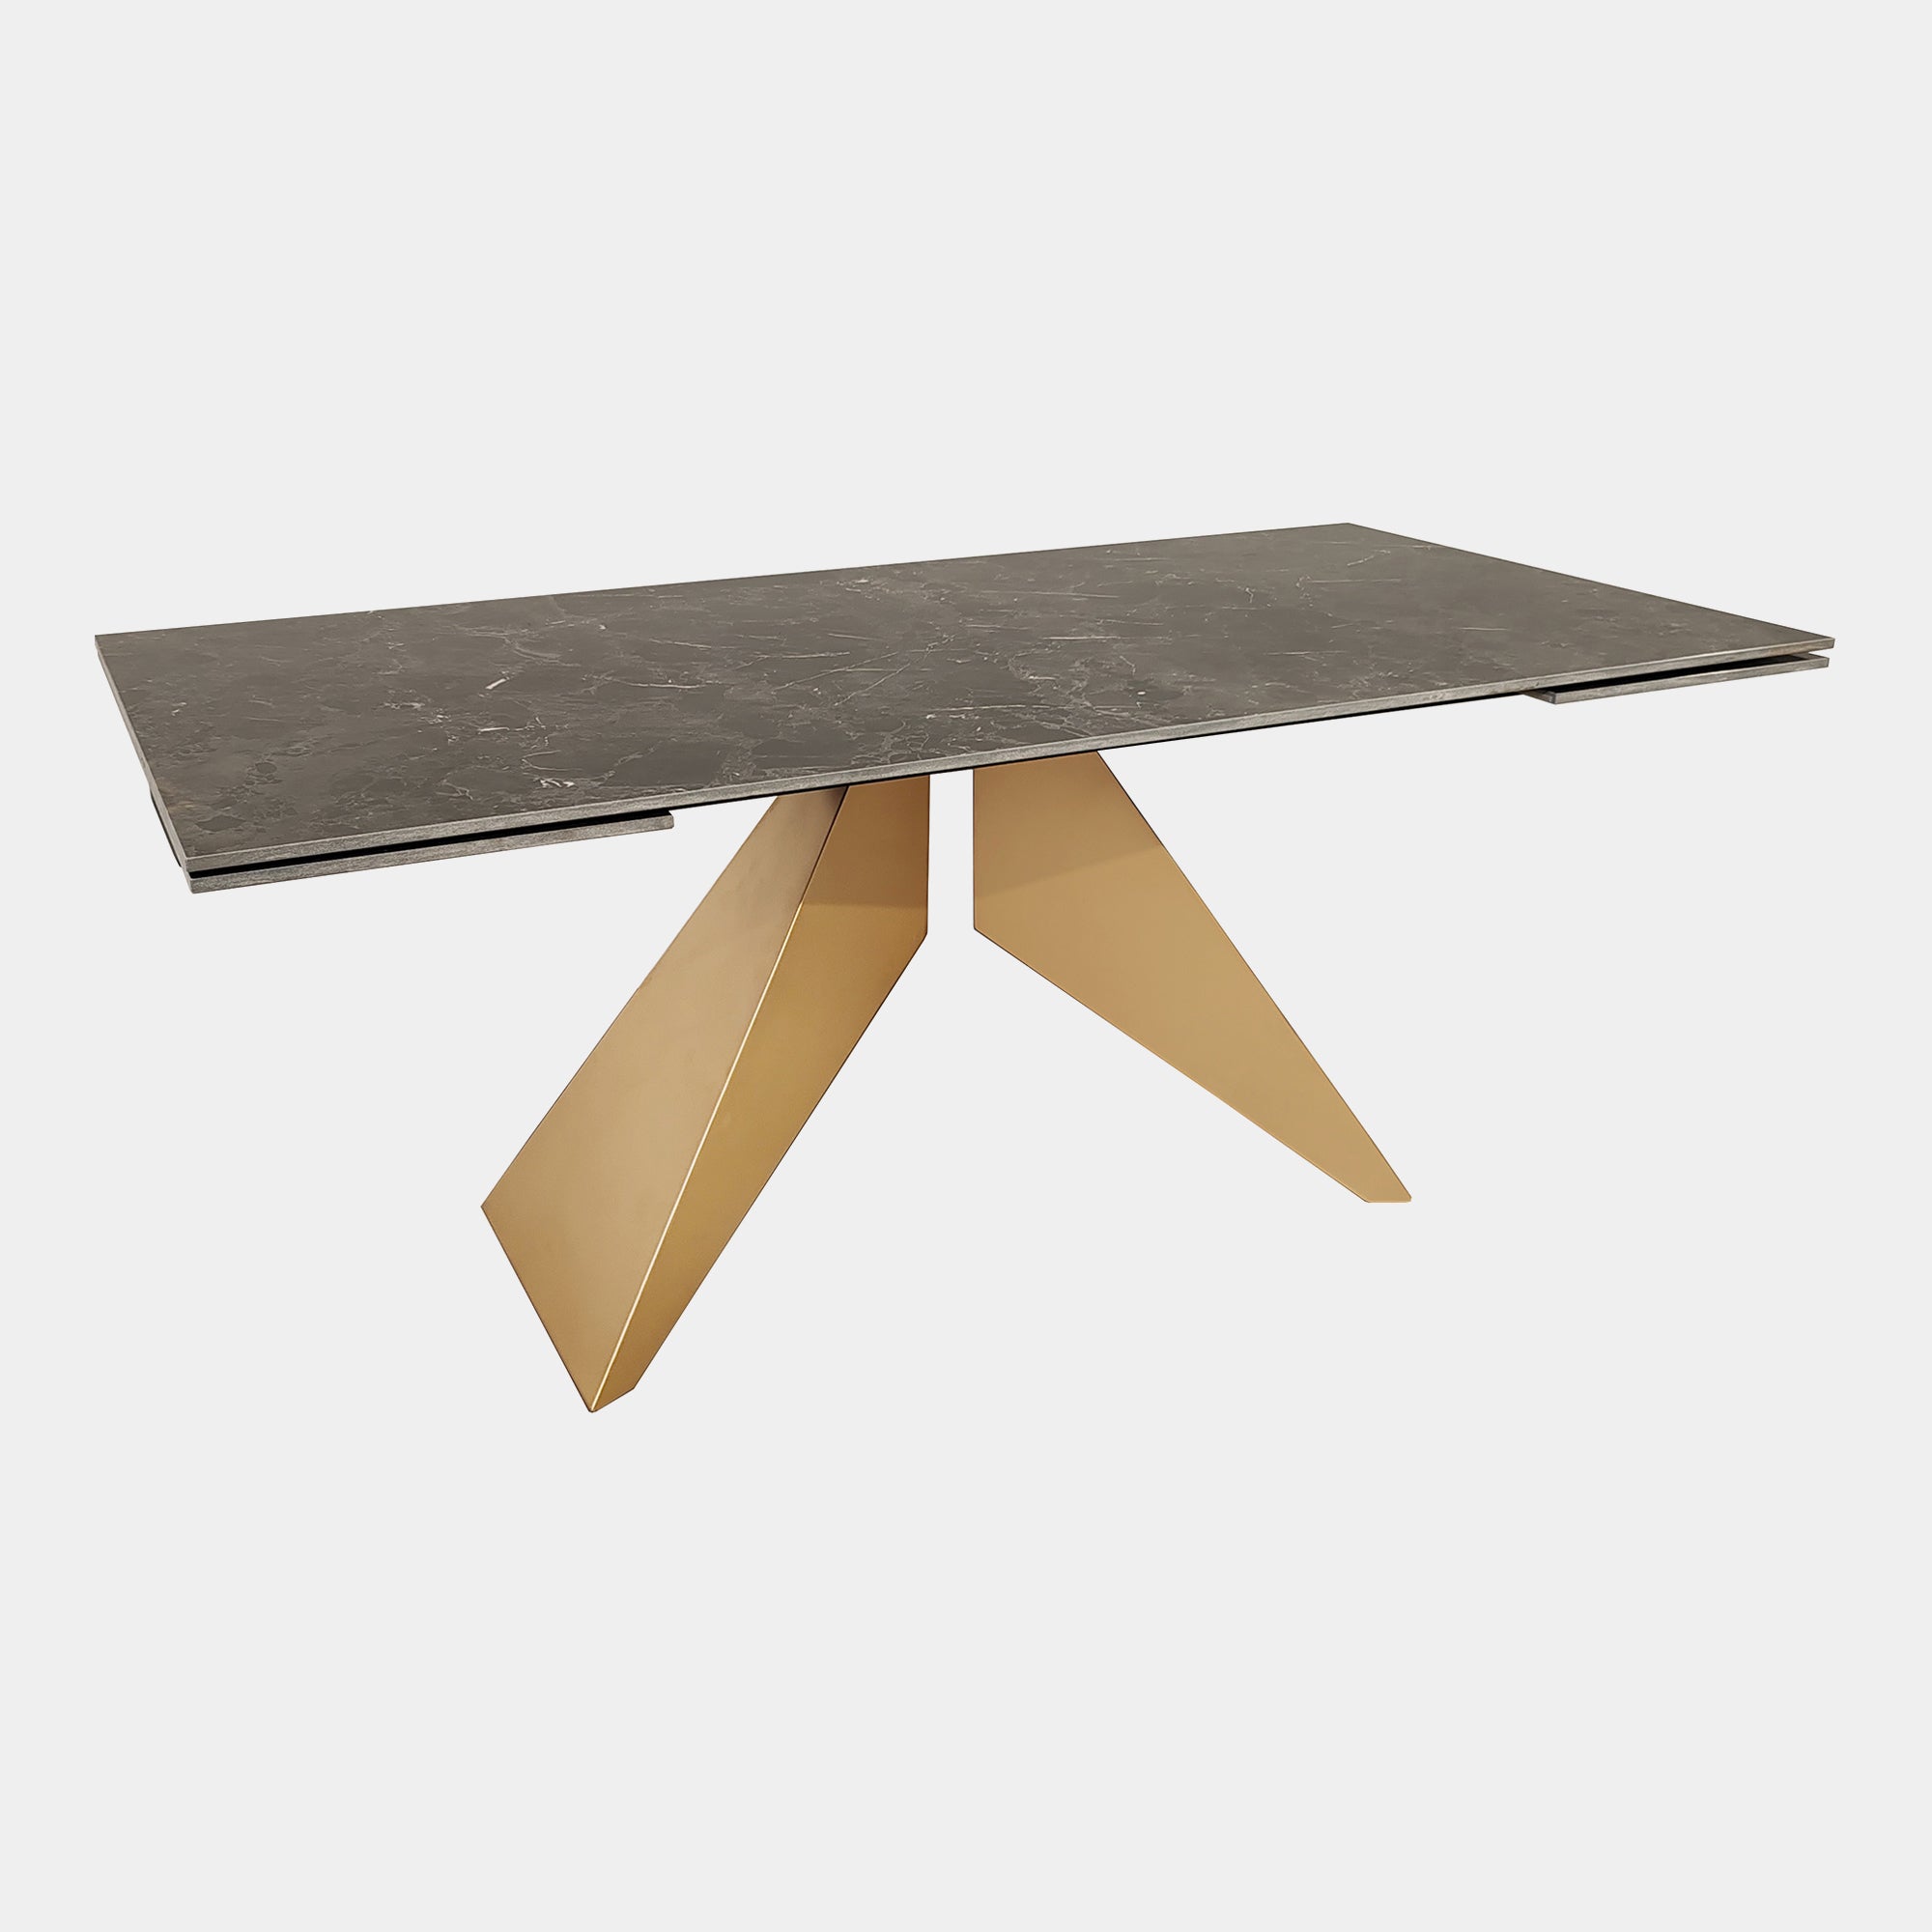 180cm Extending Dining Table With Black Ceramic Top